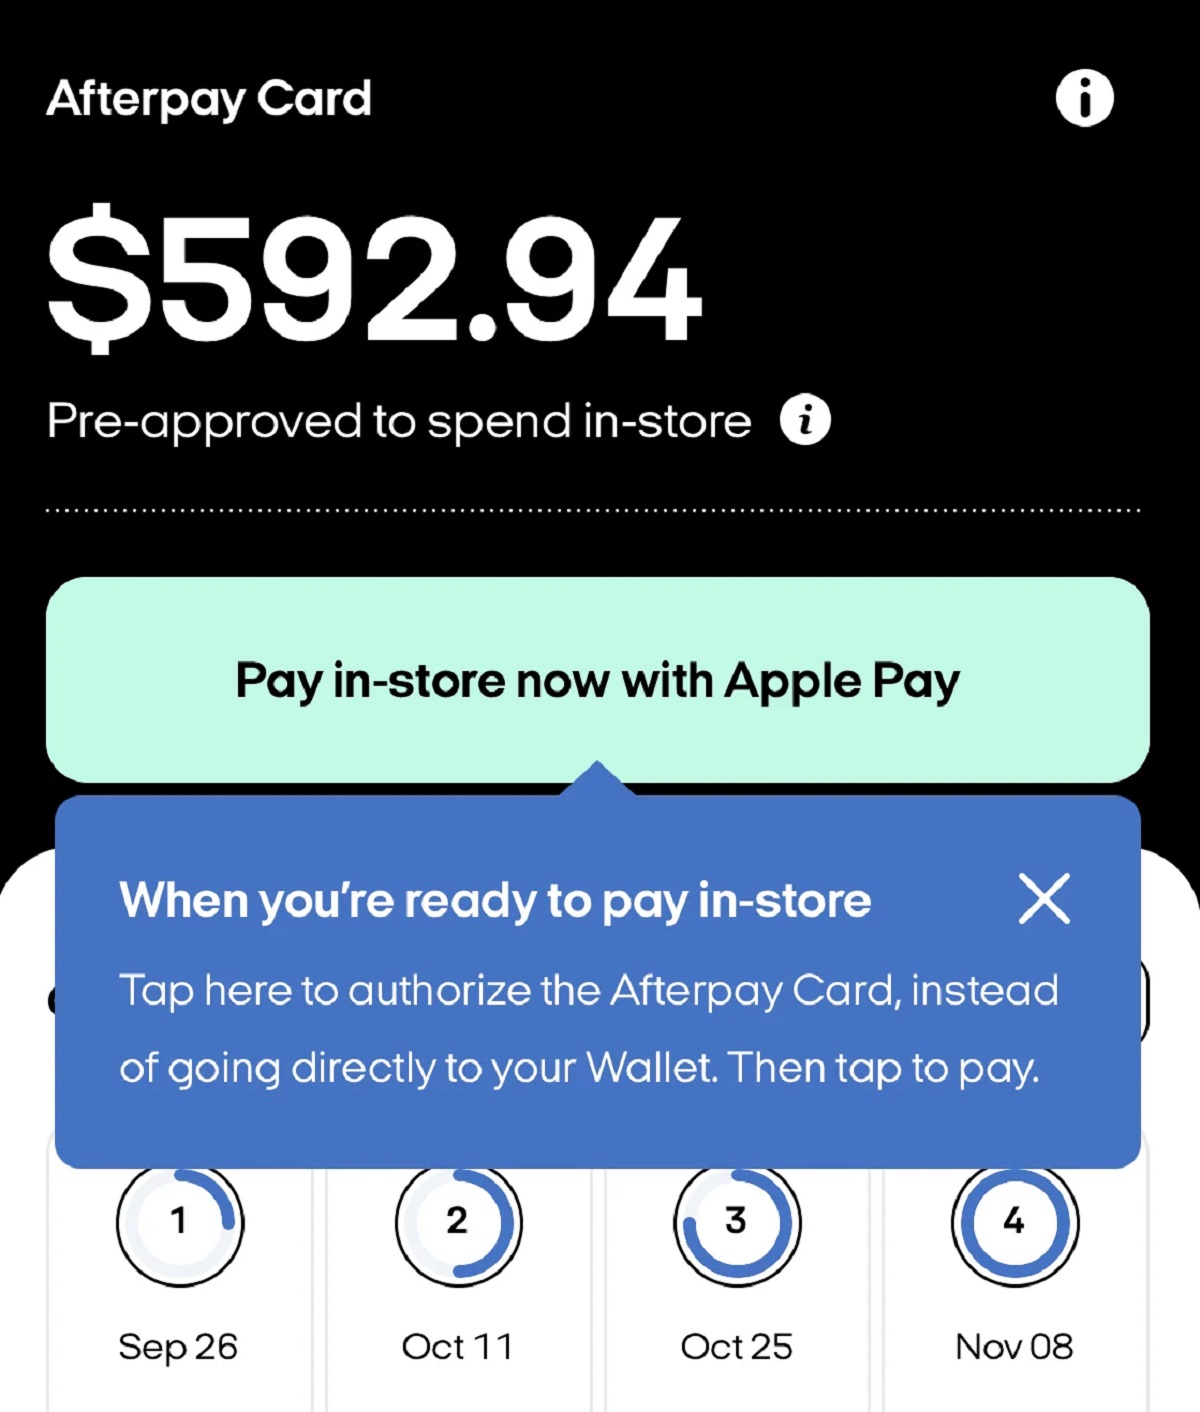 How To Use Afterpay Pre Approved Amount